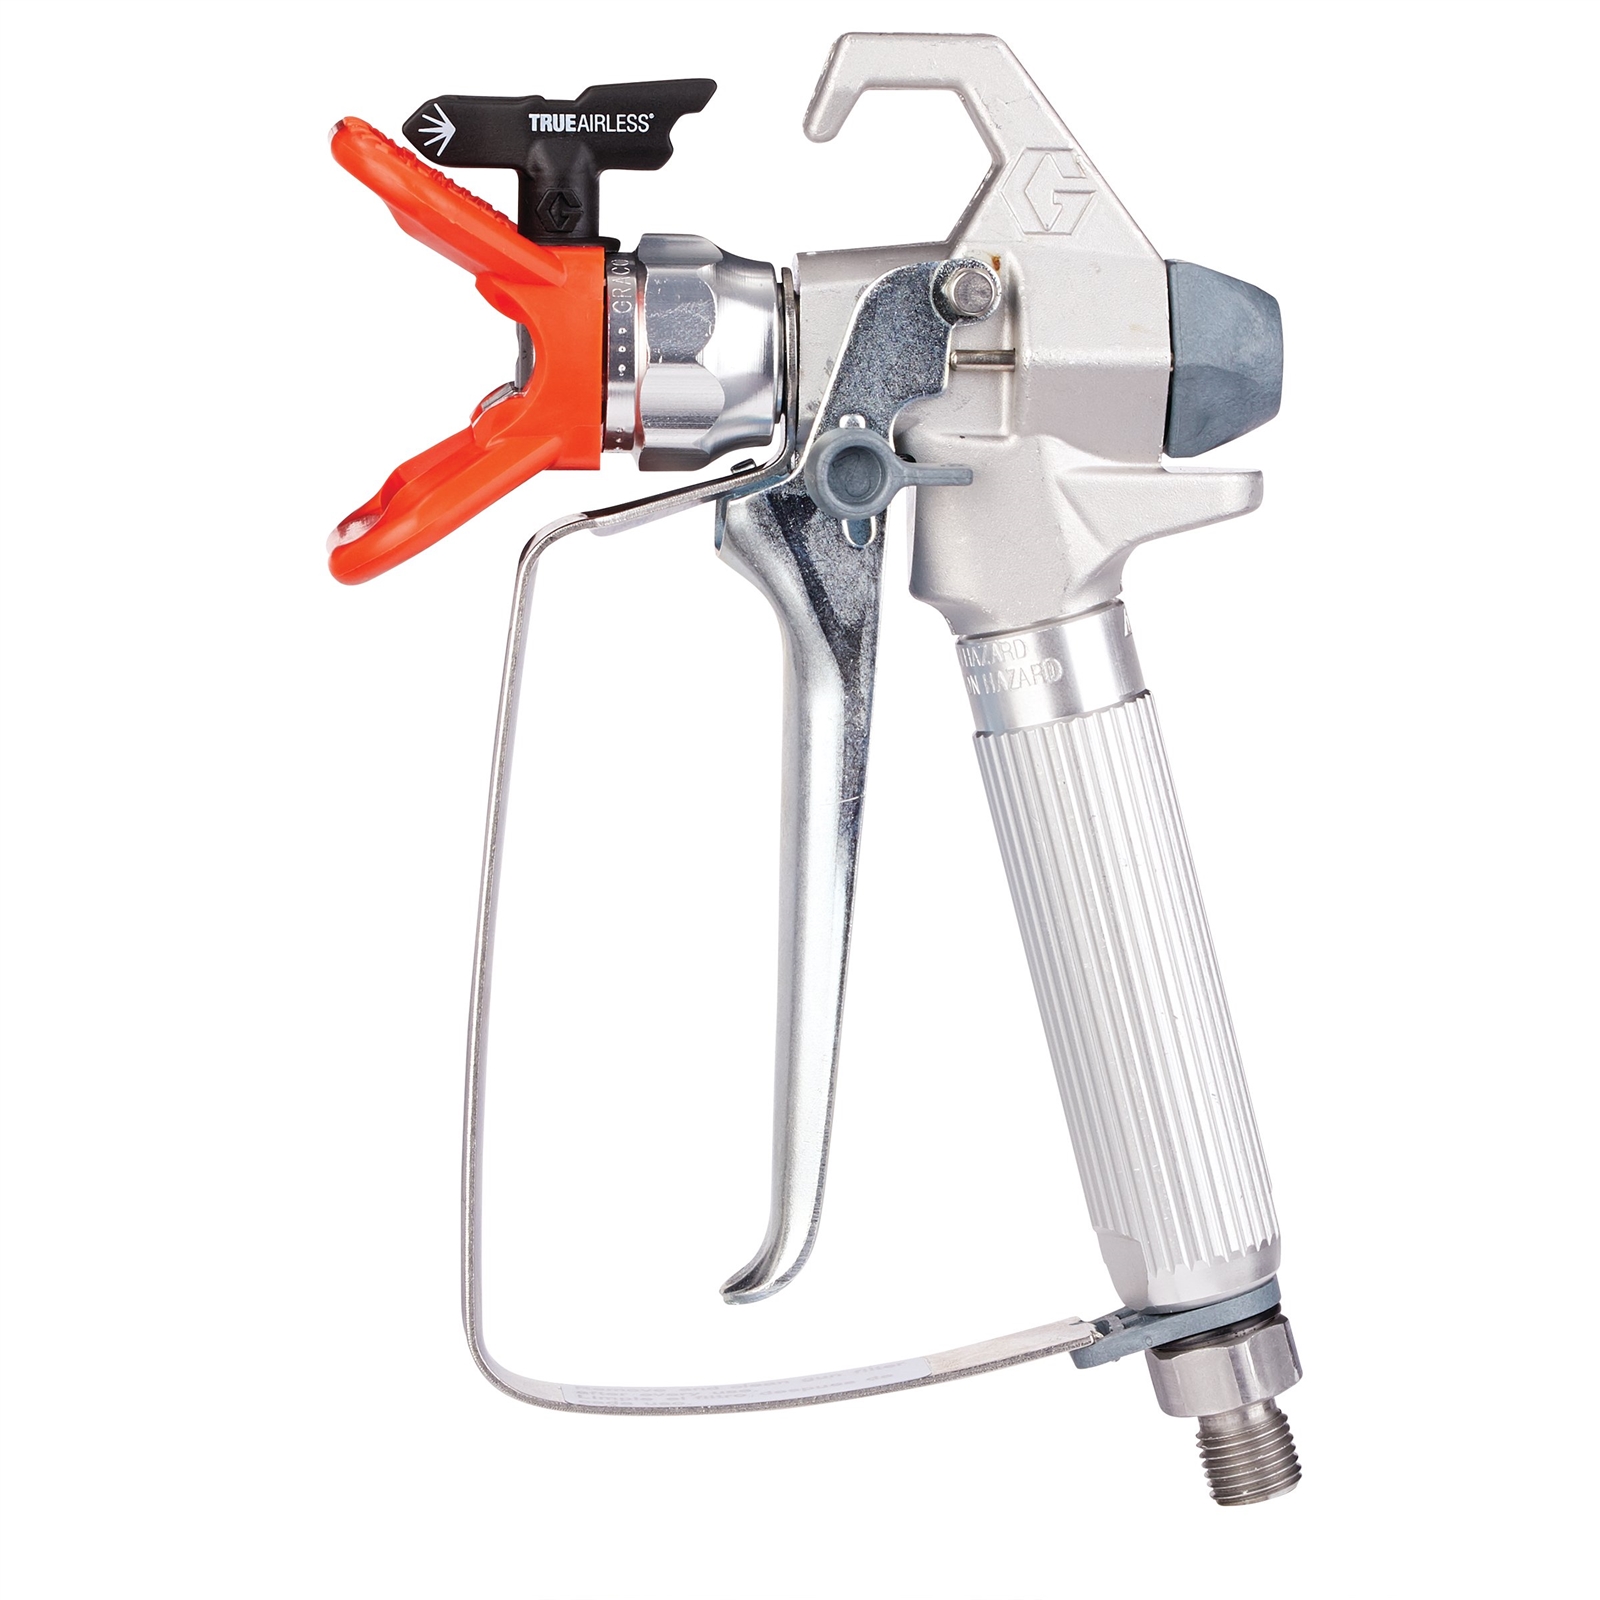 Holds Airless Paint Sprayer Tip while Spraying Graco RAC IV Hand-Tight Guard 